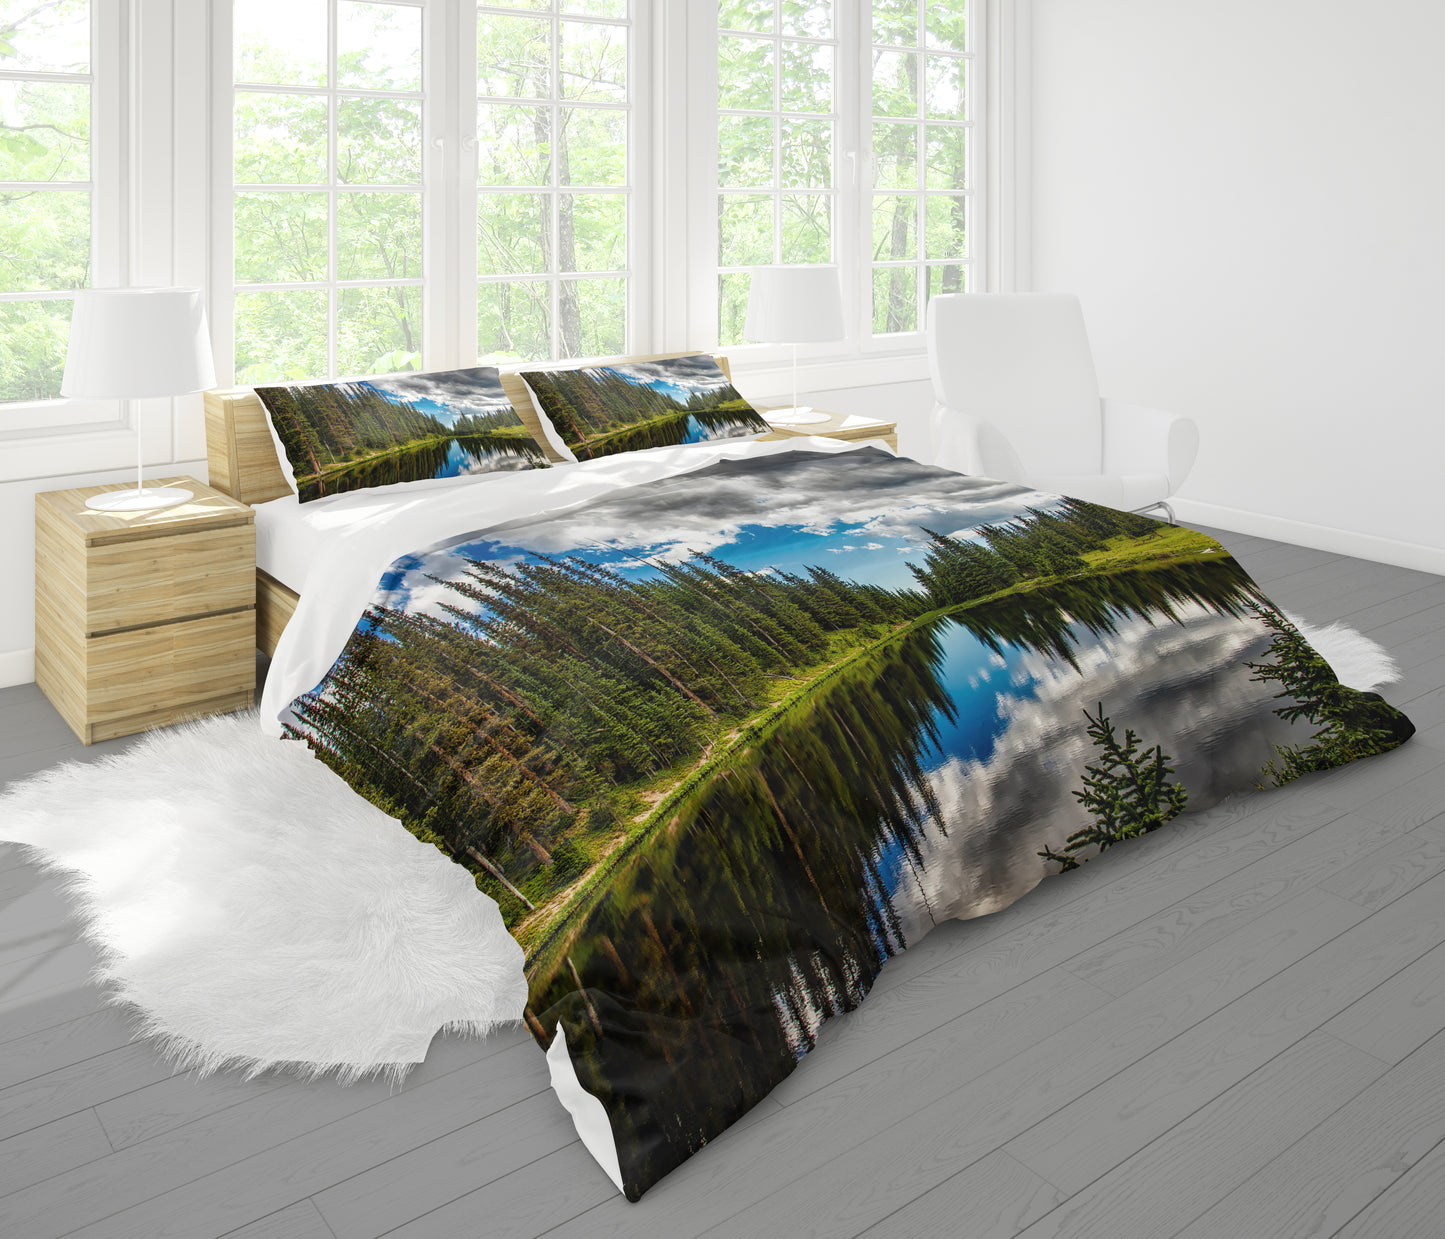 Lake in Mountains comforter or duvet cover Twin Queen King